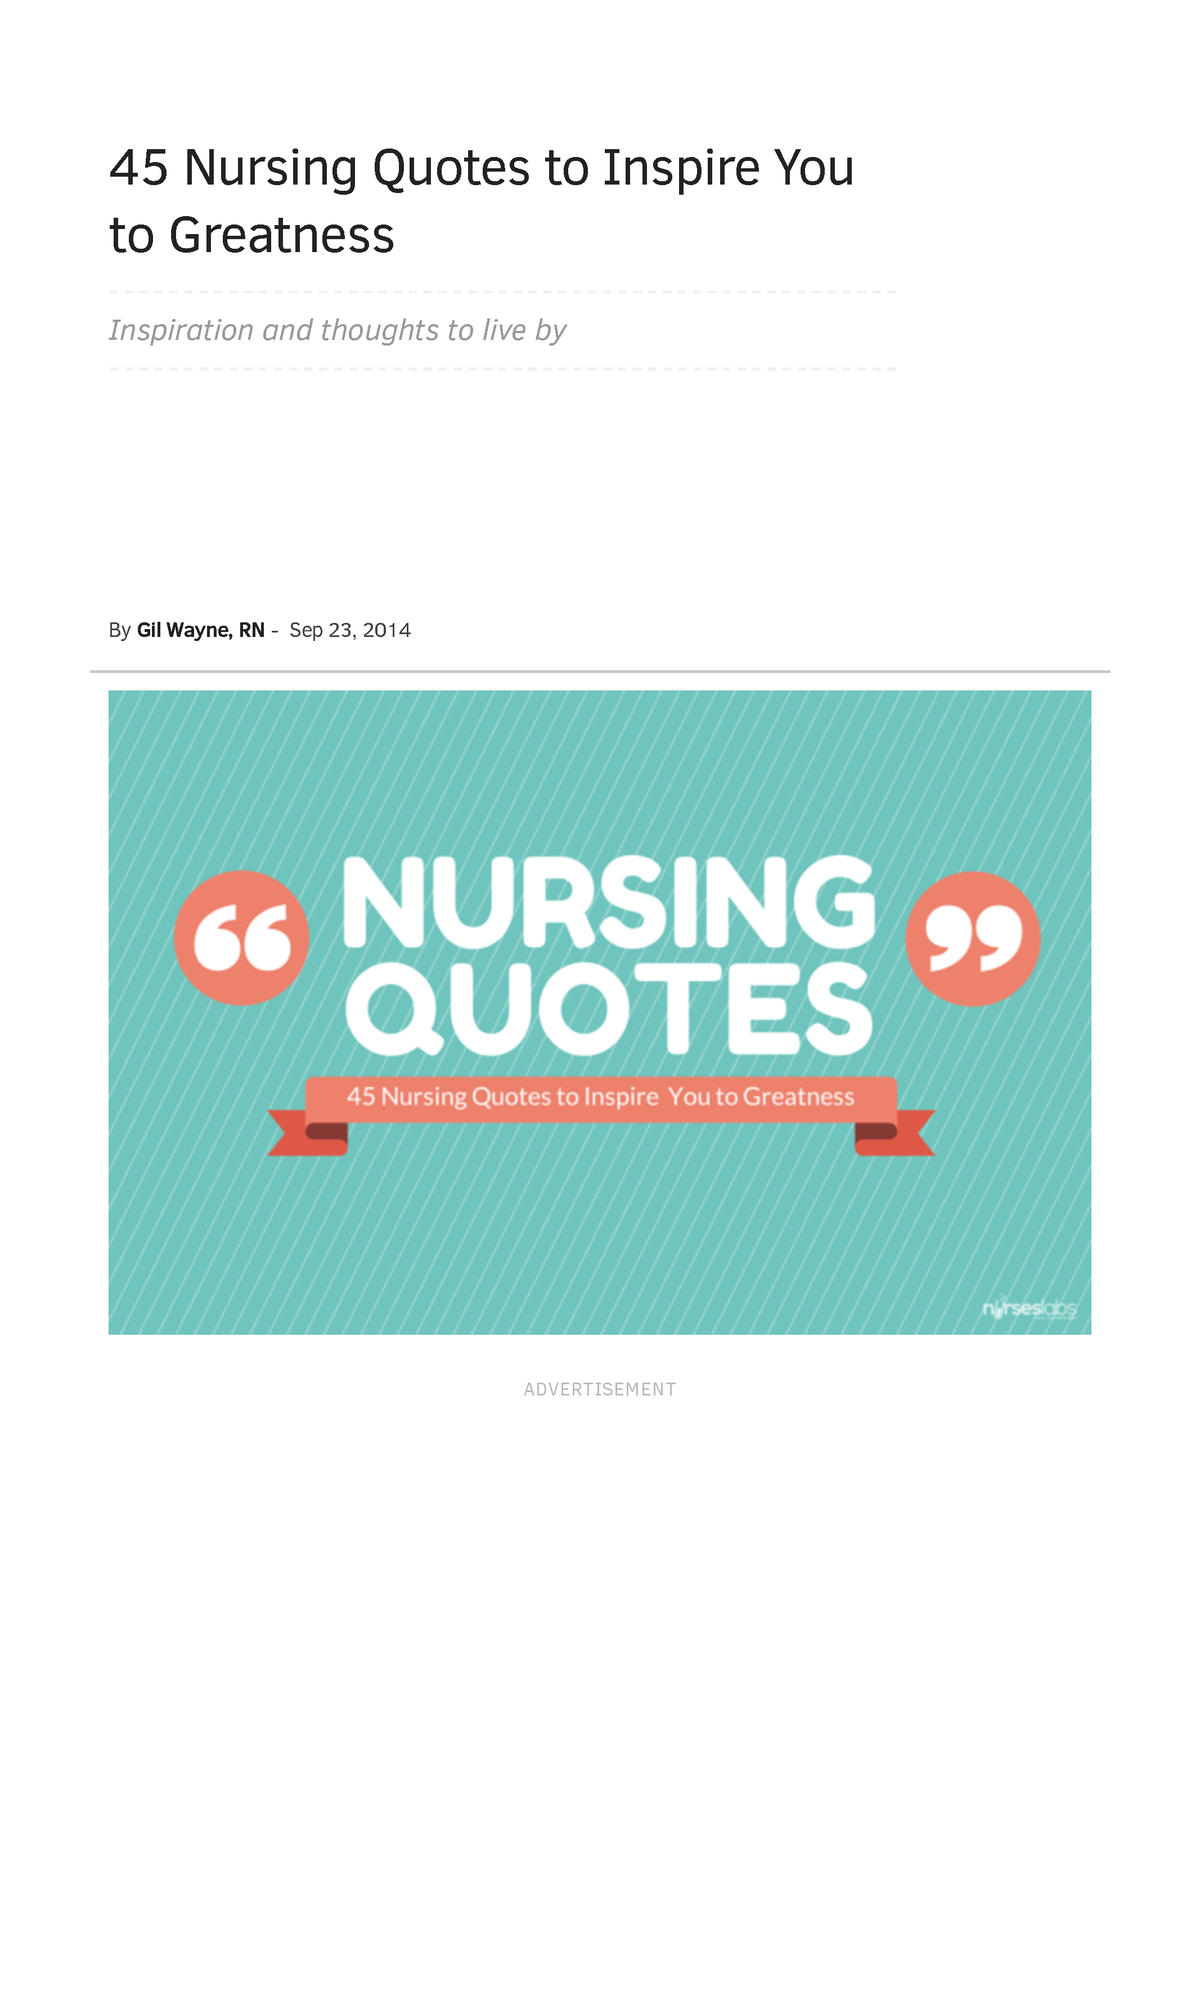 421919134 Quotes Nursing 45 Nursing Quotes To Inspire You To Greatness Inspiration And